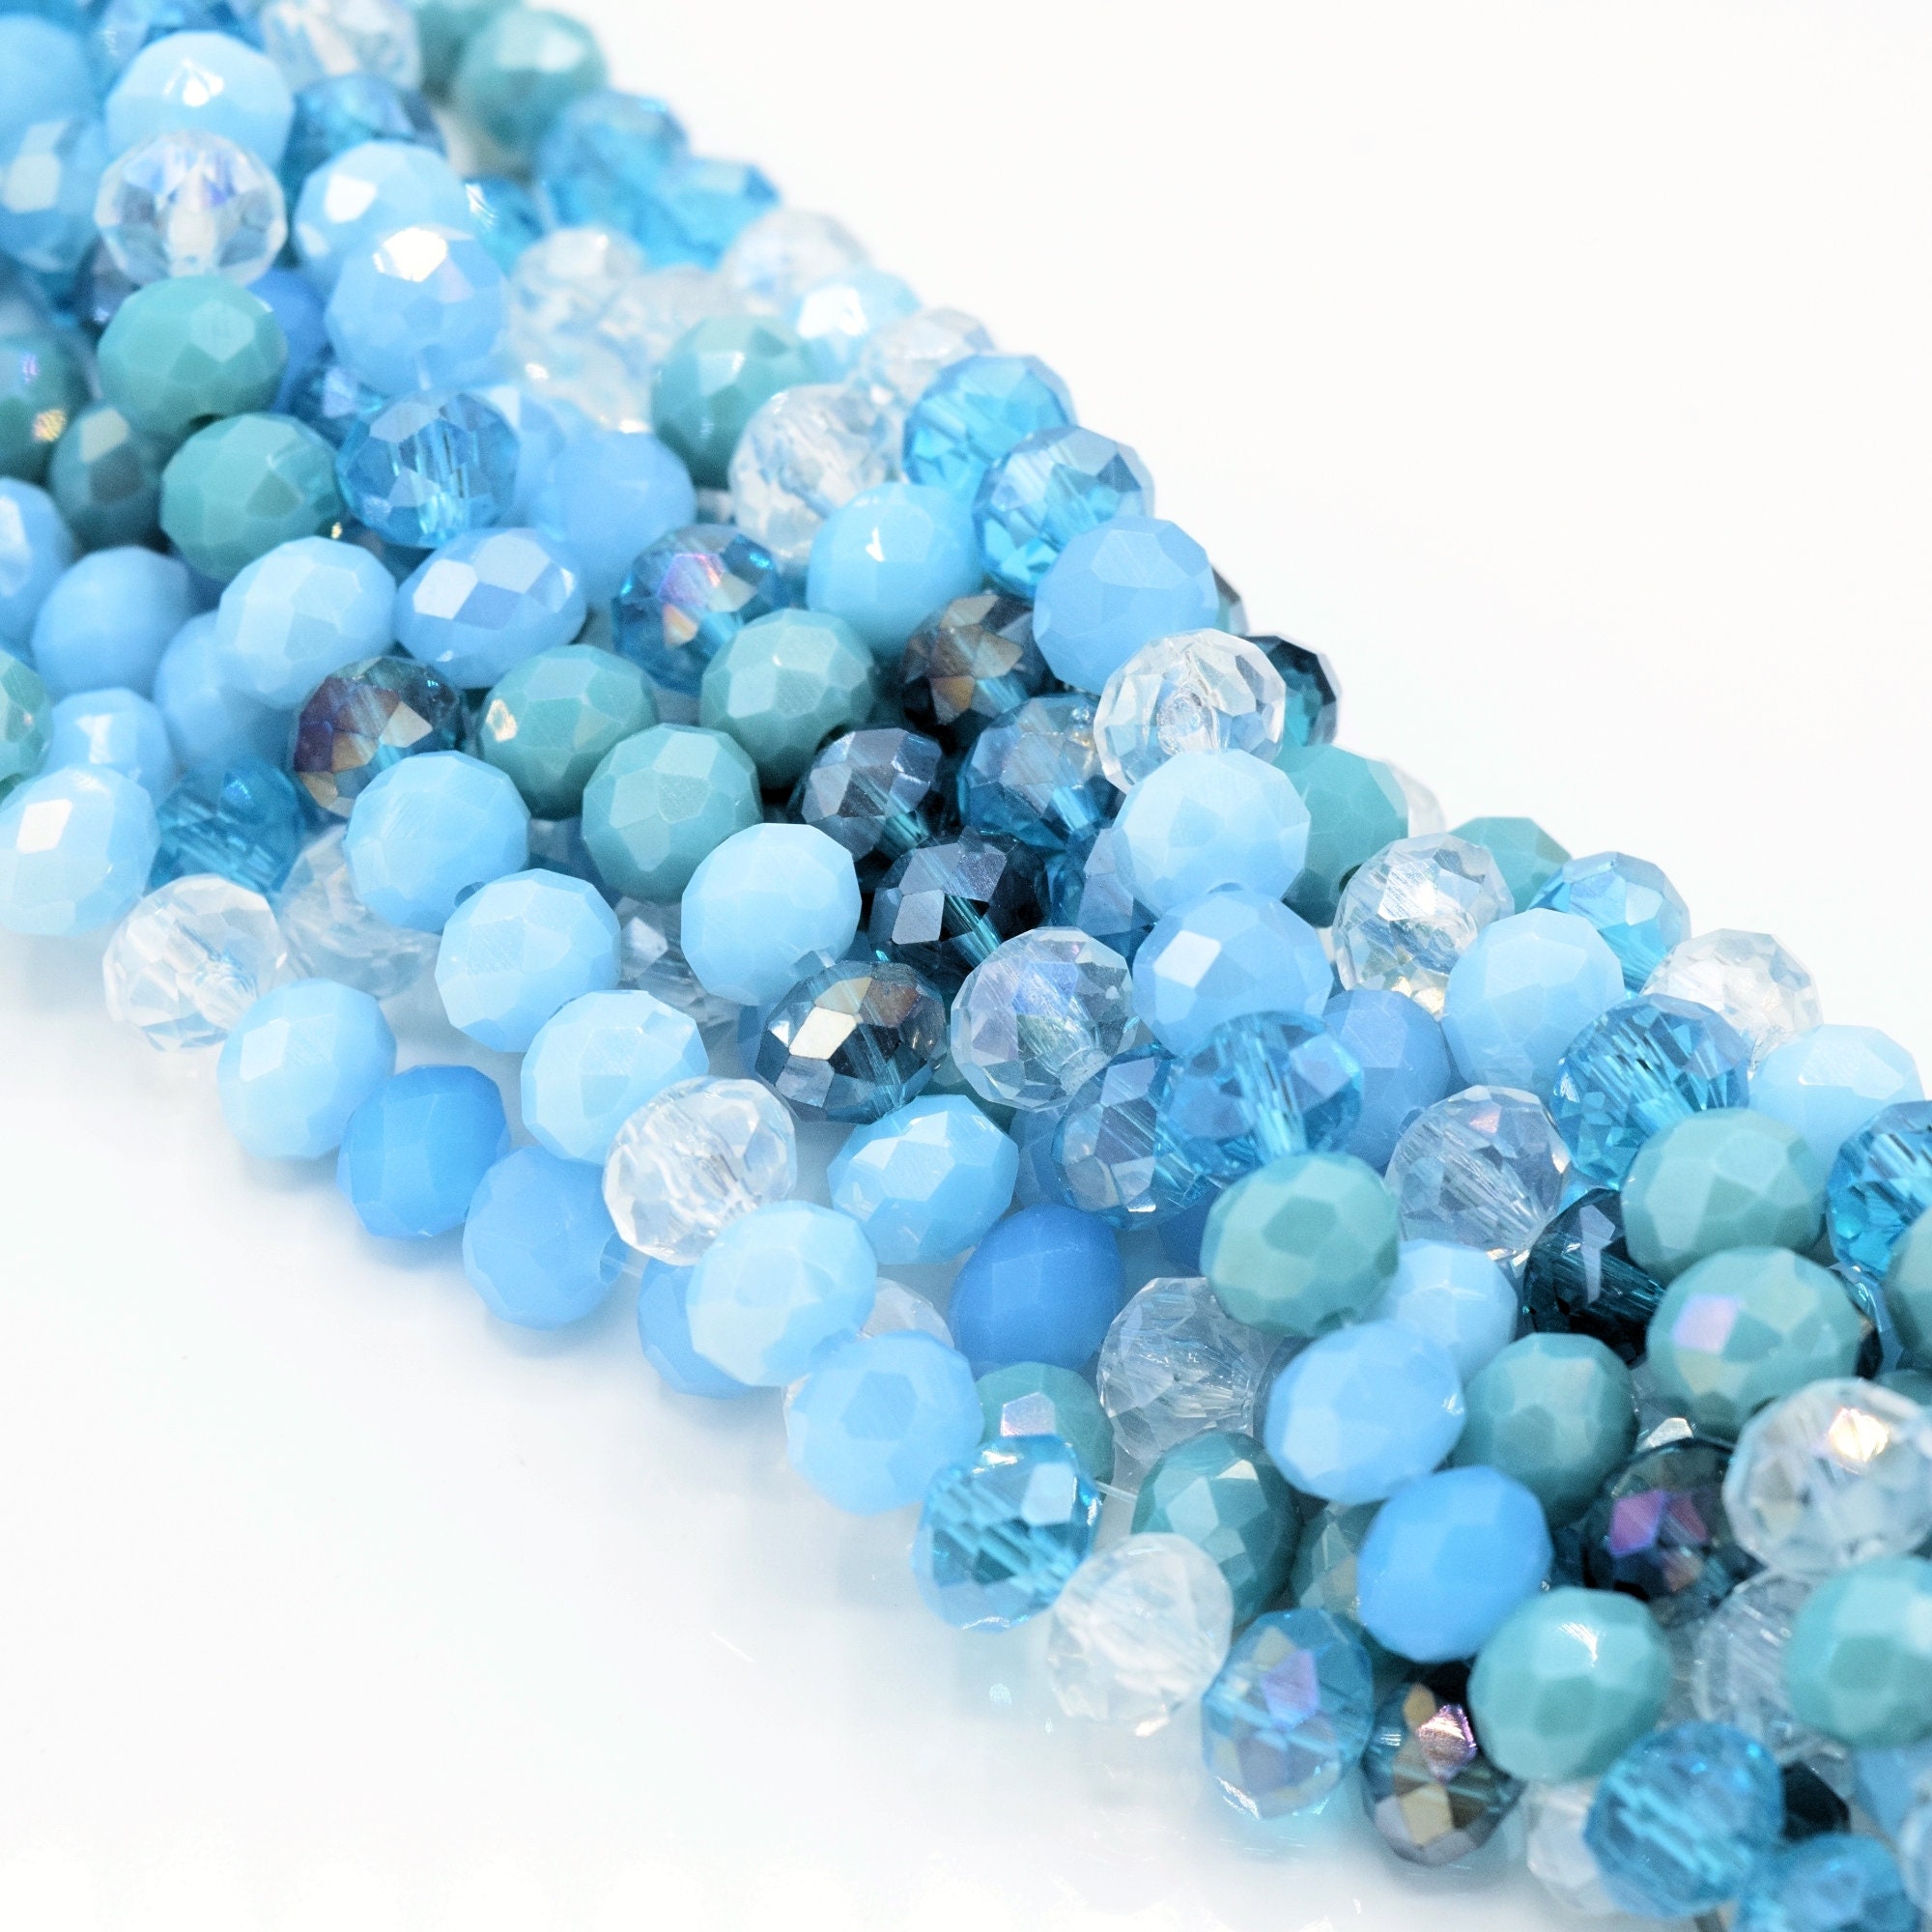 50x Mixed Color Crystal Beads, 3x4mm Small Rondelle Faceted Glass